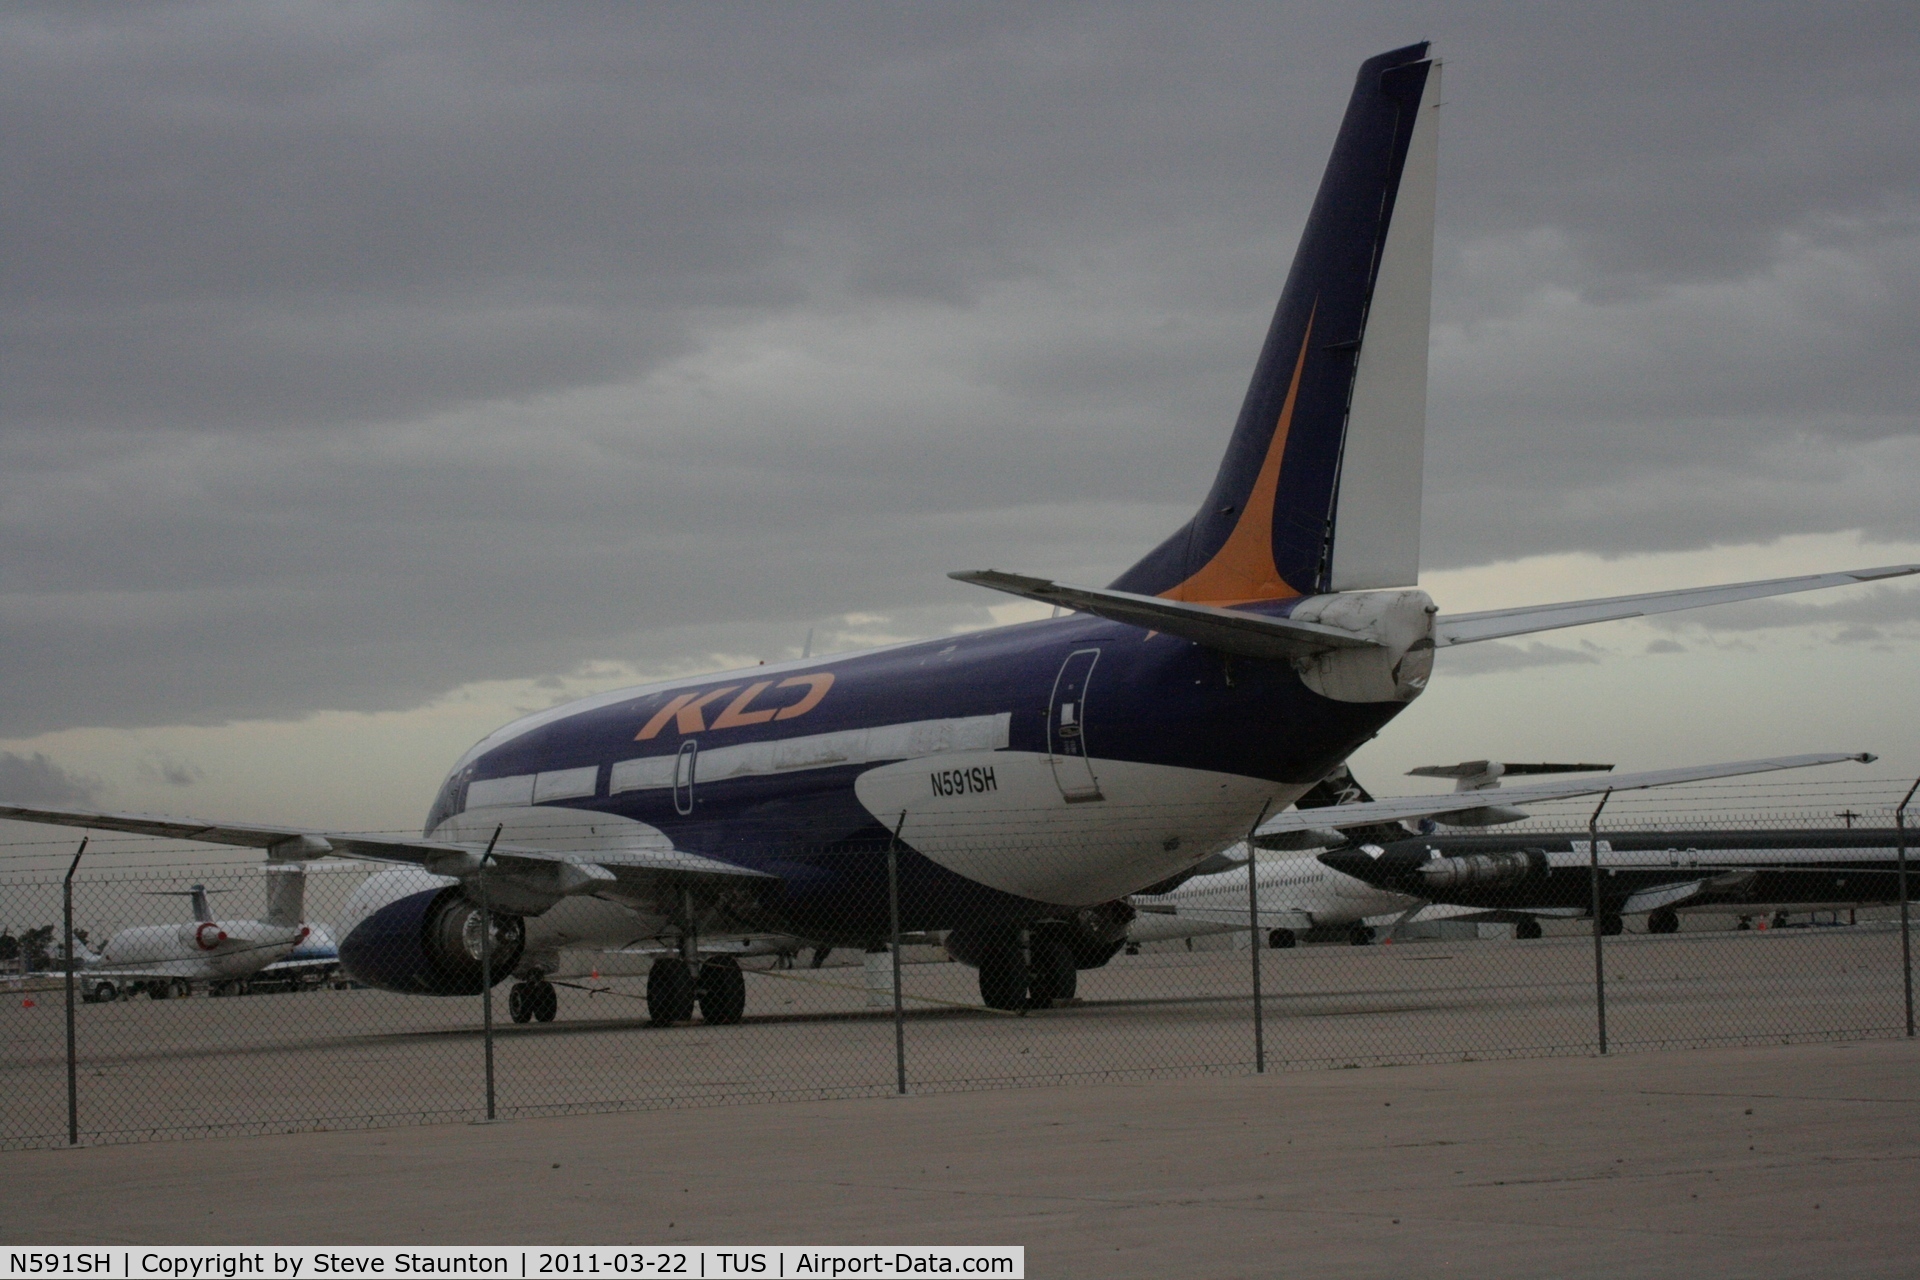 N591SH, 1986 Boeing 737-3K2 C/N 23411, Taken at Tucson Airport, in March 2011 whilst on an Aeroprint Aviation tour